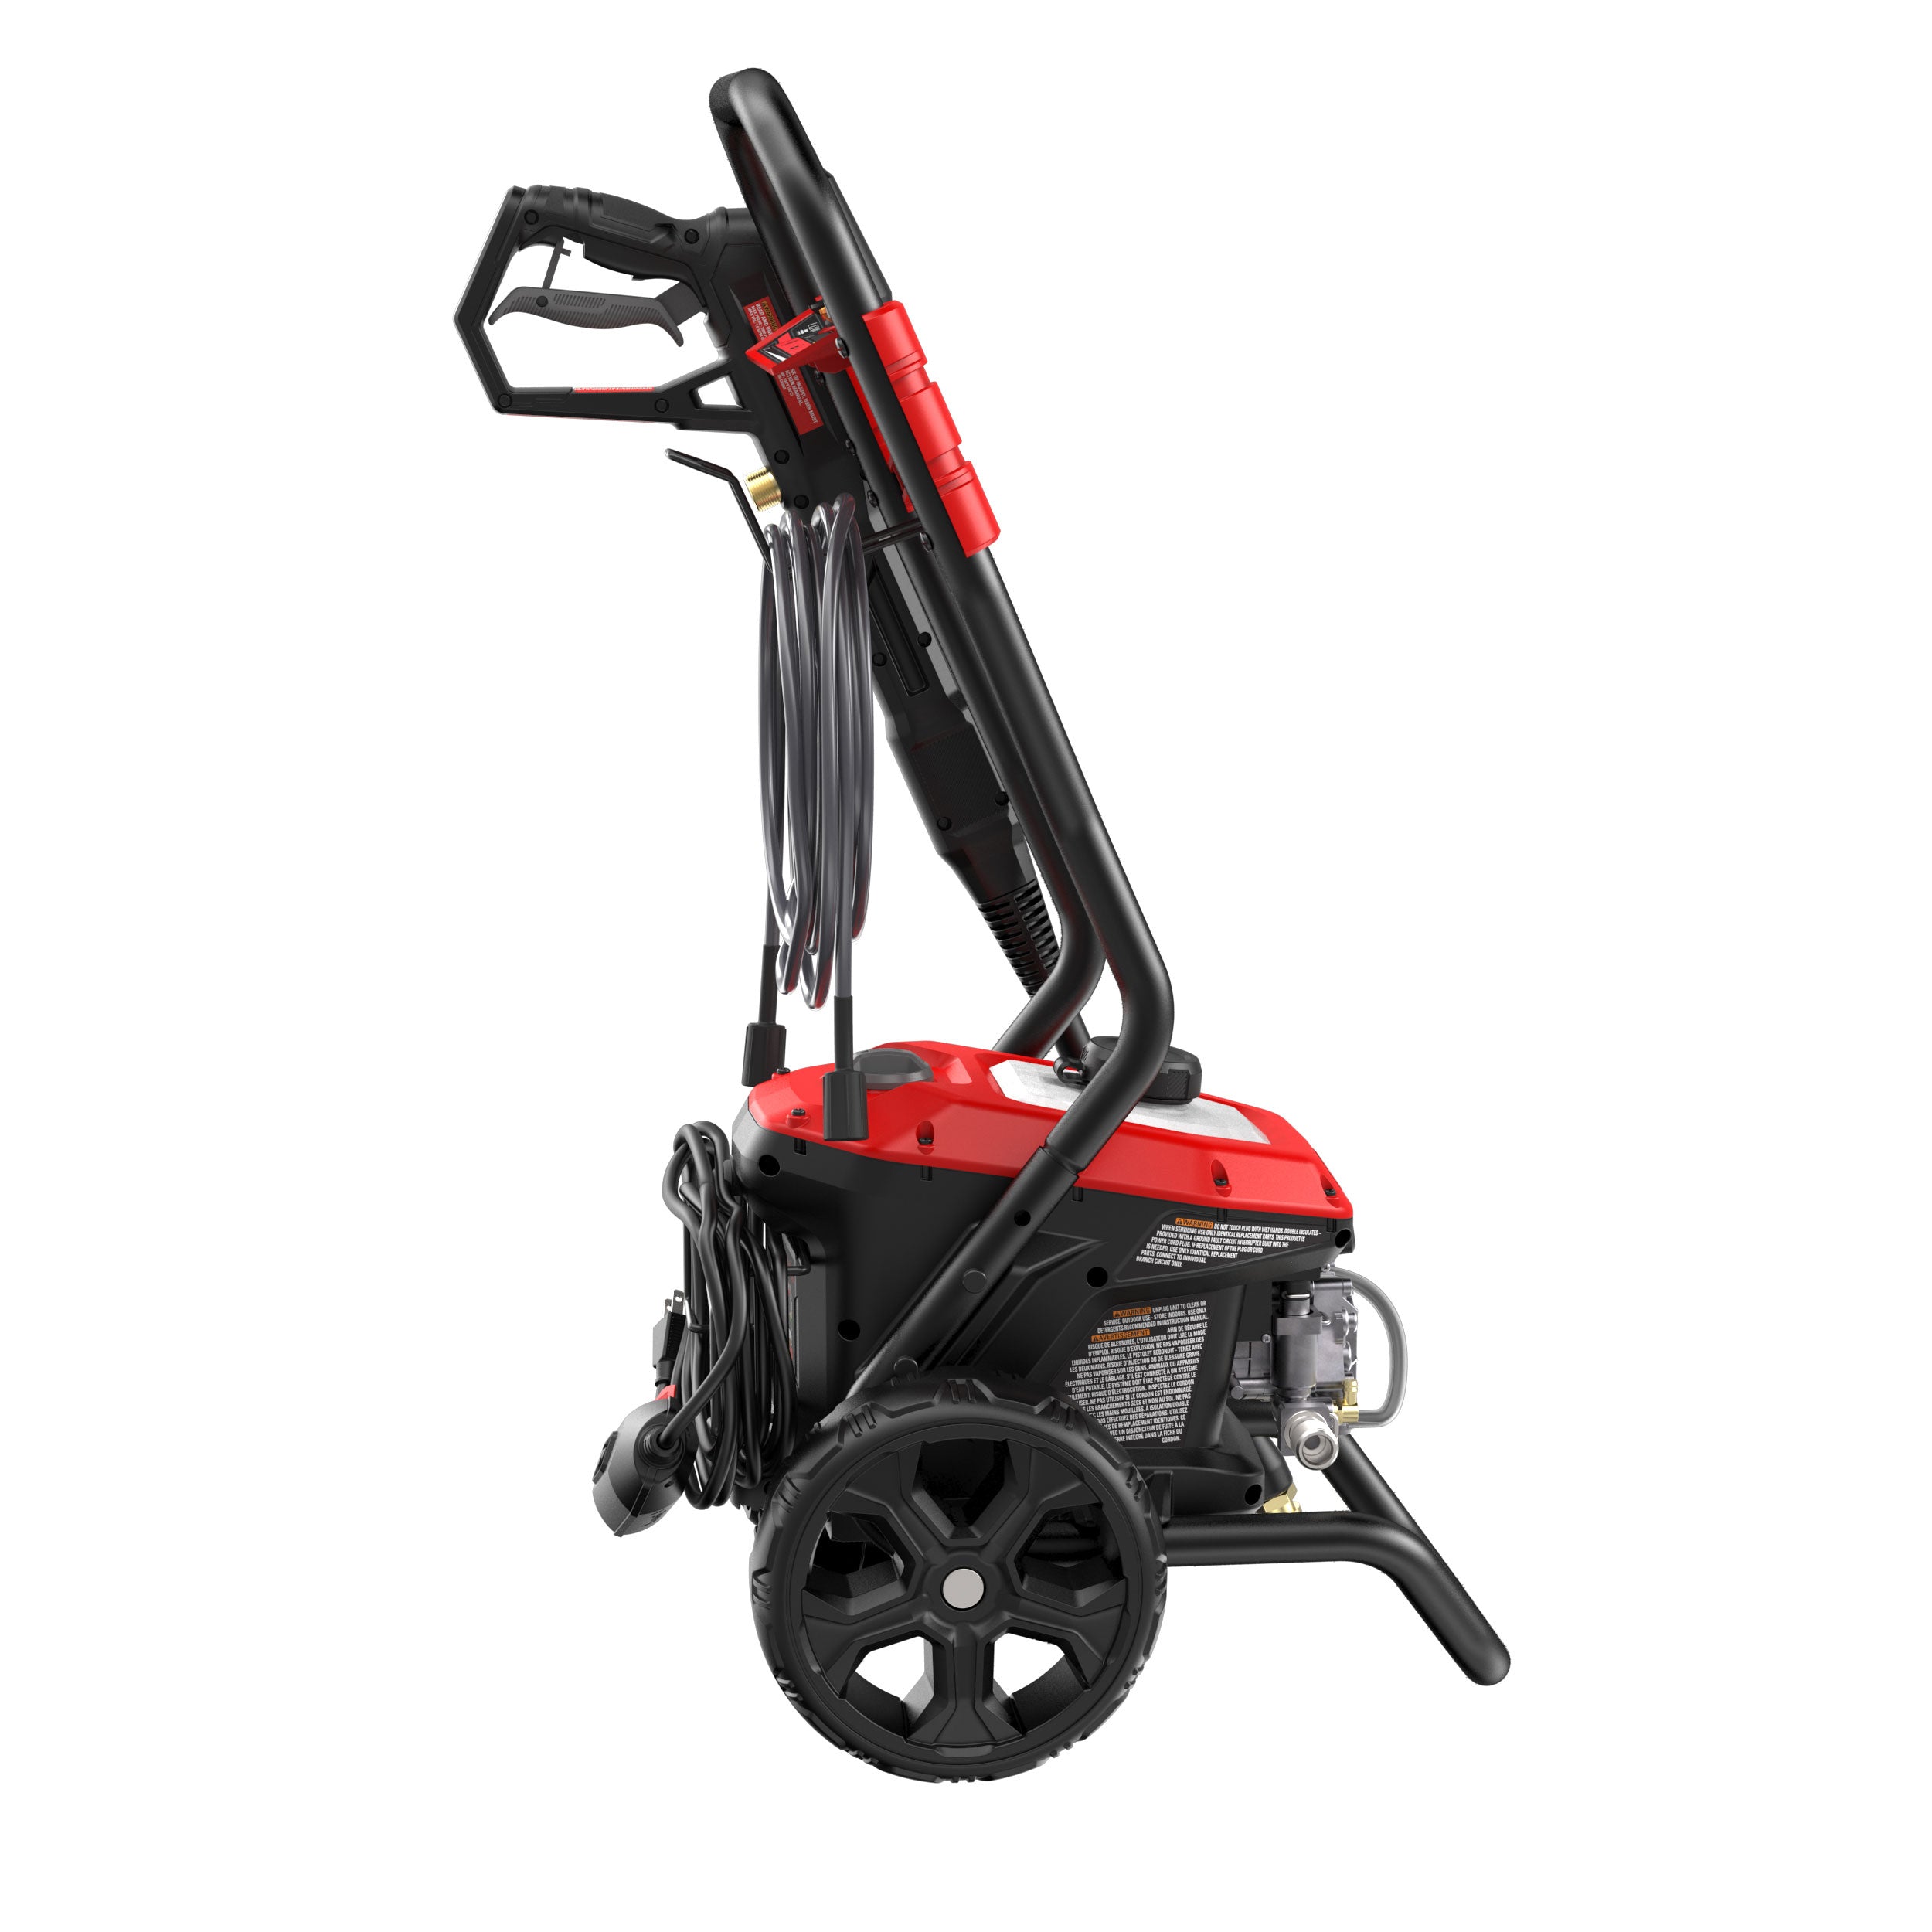 Electric Cold Water Pressure Washer (1900 MAX PSI*)